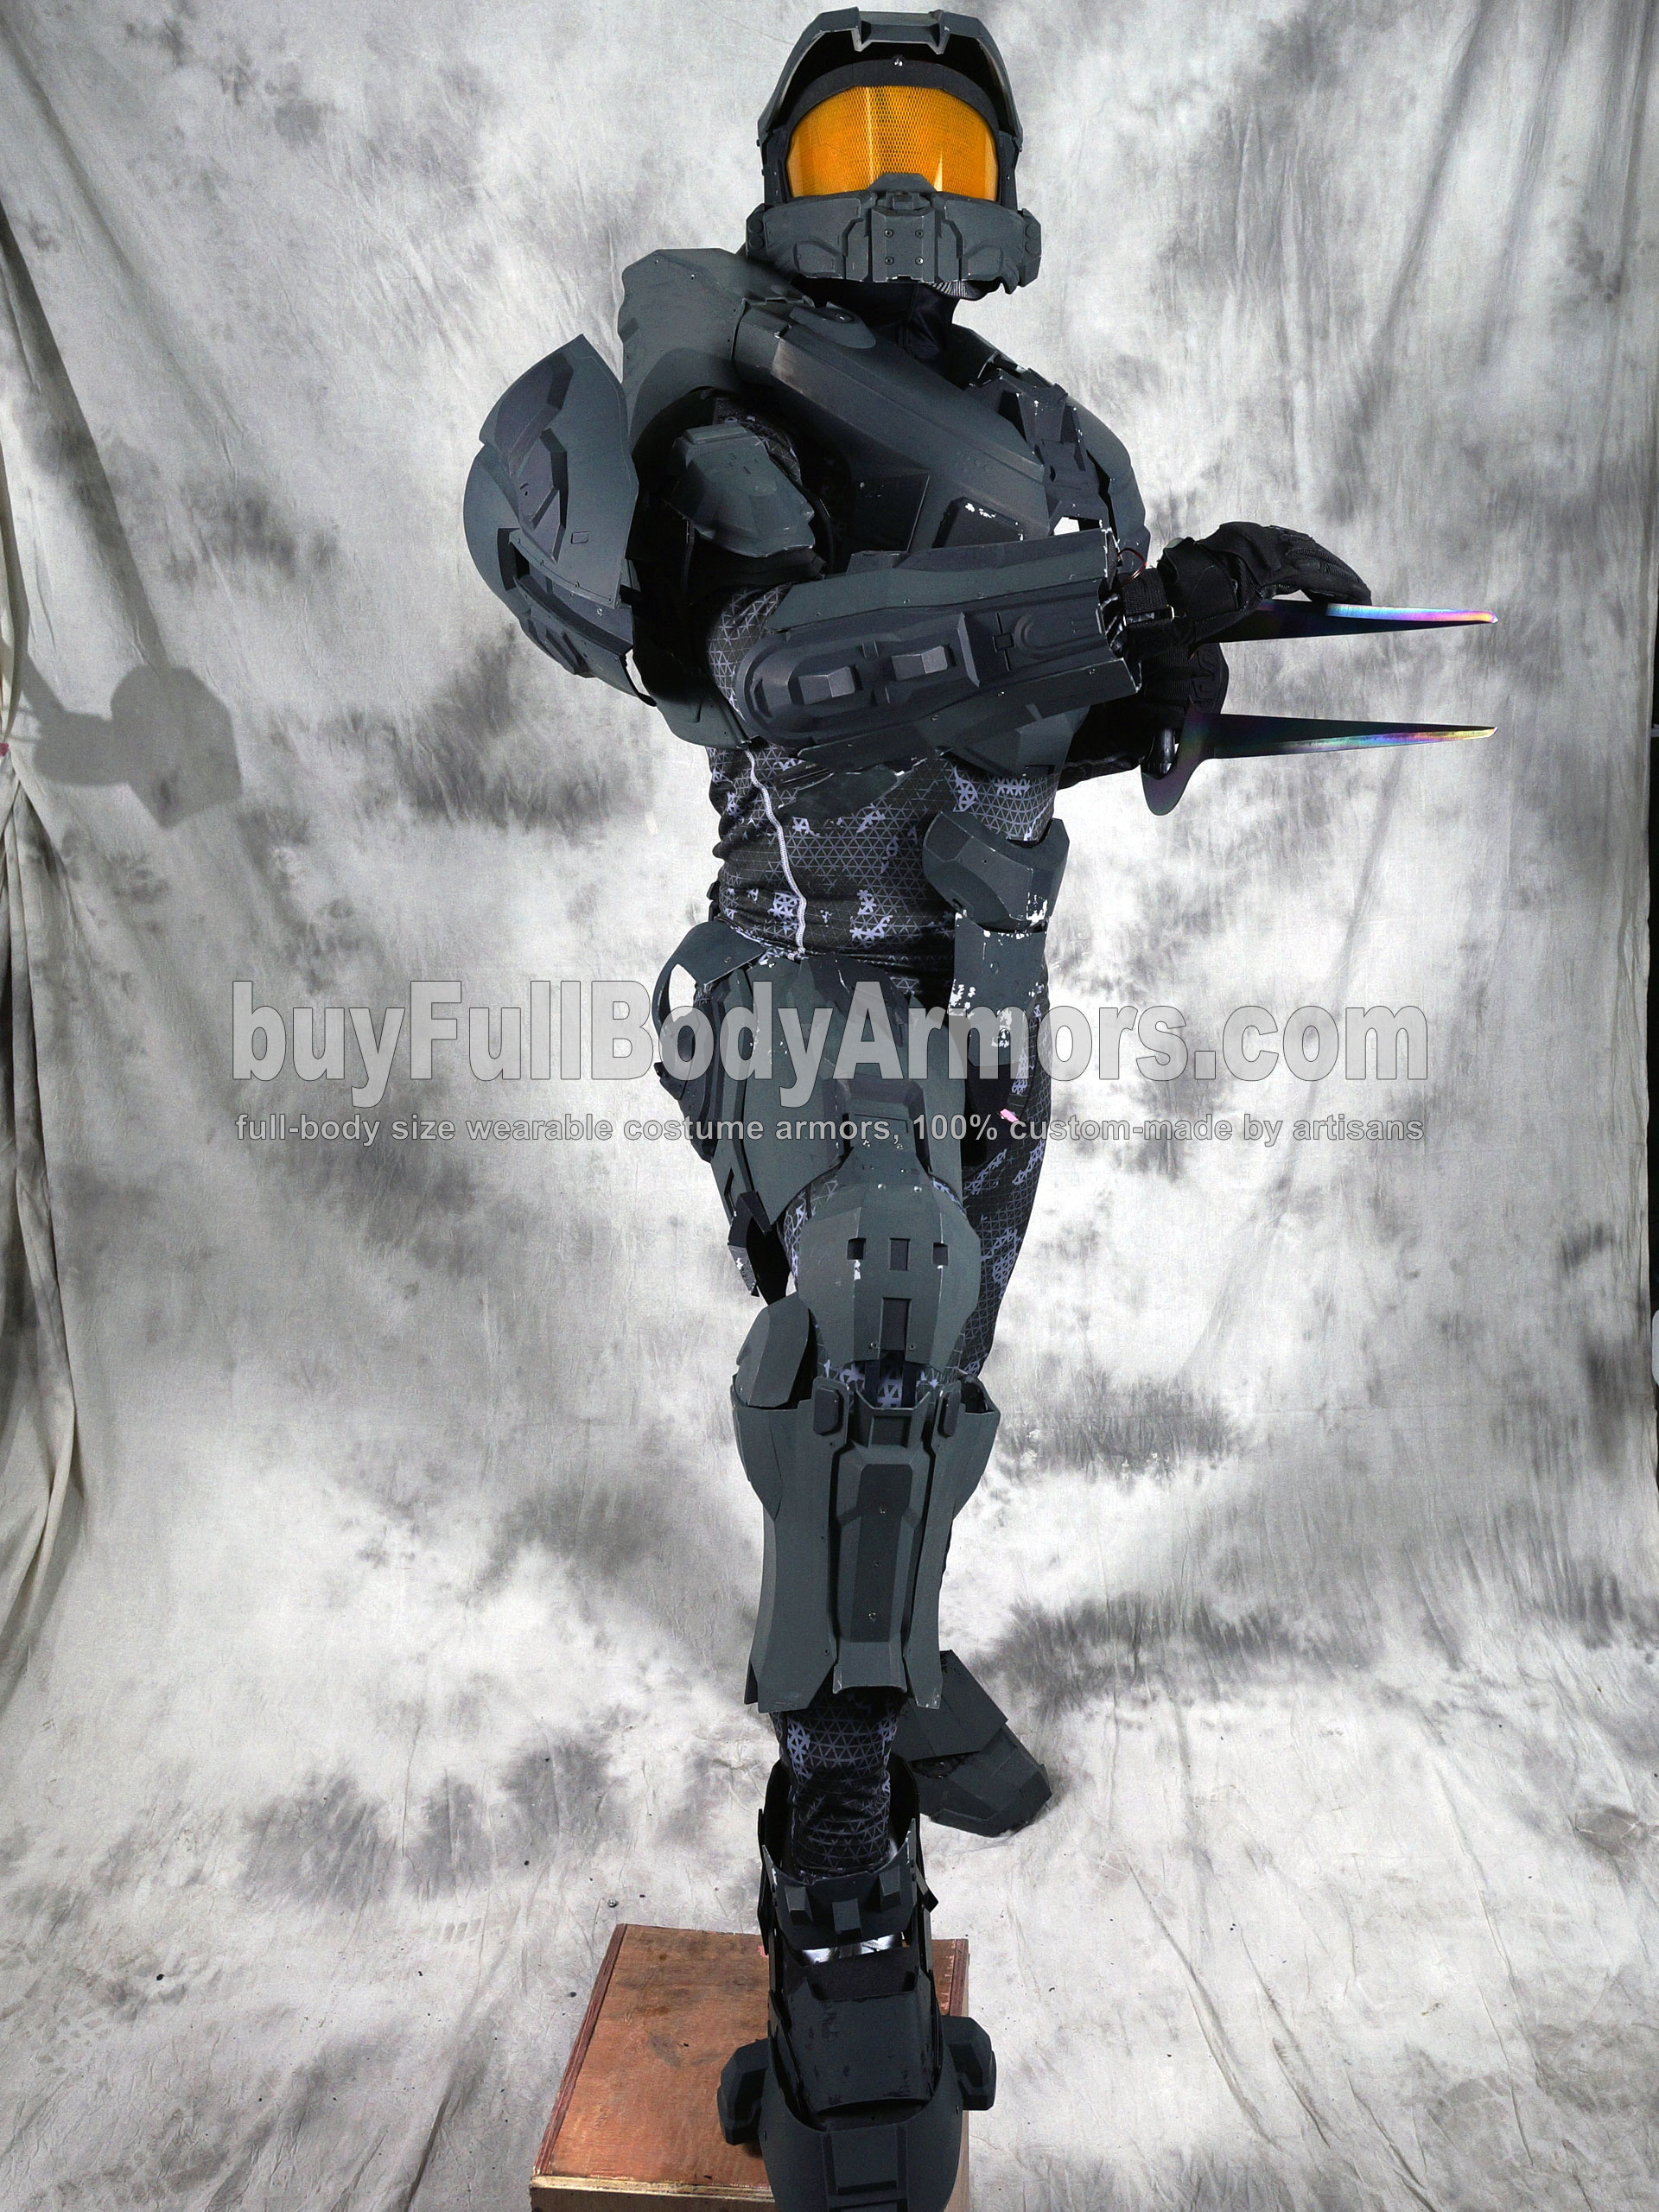 wearable Halo 5 Master Chief armor suit costume prototype DSLR5